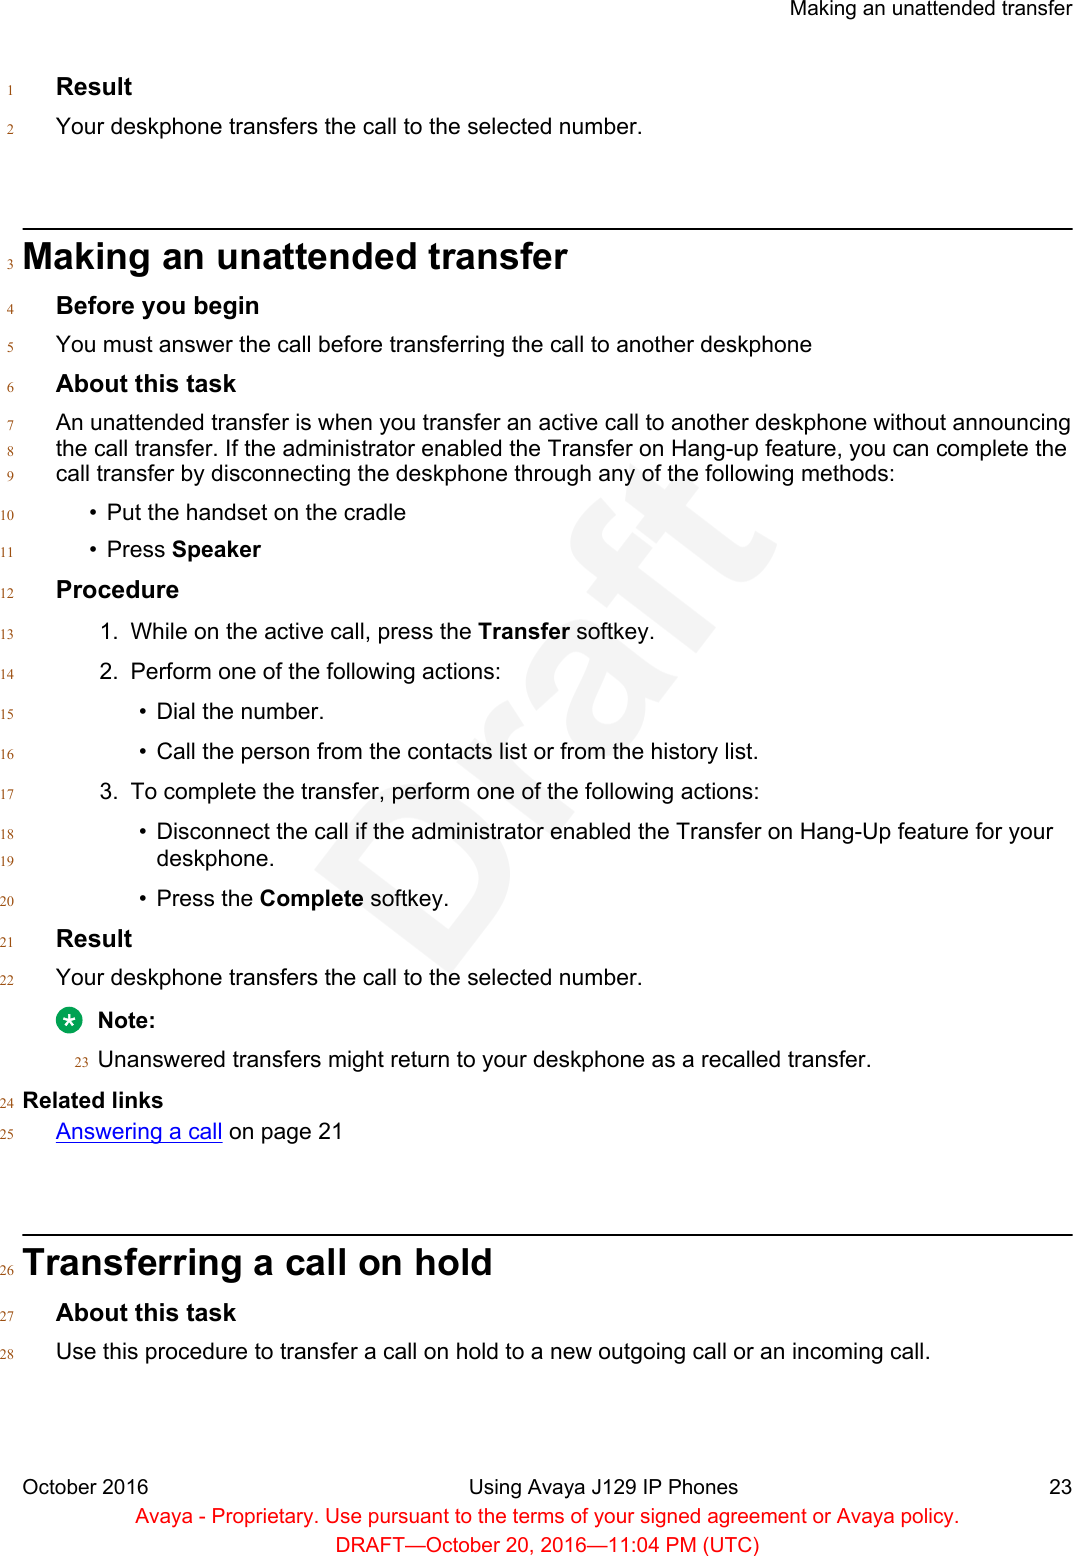 Result1Your deskphone transfers the call to the selected number.2Making an unattended transfer3Before you begin4You must answer the call before transferring the call to another deskphone5About this task6An unattended transfer is when you transfer an active call to another deskphone without announcing7the call transfer. If the administrator enabled the Transfer on Hang-up feature, you can complete the8call transfer by disconnecting the deskphone through any of the following methods:9• Put the handset on the cradle10• Press Speaker11Procedure121. While on the active call, press the Transfer softkey.132. Perform one of the following actions:14• Dial the number.15• Call the person from the contacts list or from the history list.163. To complete the transfer, perform one of the following actions:17• Disconnect the call if the administrator enabled the Transfer on Hang-Up feature for your18deskphone.19• Press the Complete softkey.20Result21Your deskphone transfers the call to the selected number.22Note:Unanswered transfers might return to your deskphone as a recalled transfer.23Related links24Answering a call on page 2125Transferring a call on hold26About this task27Use this procedure to transfer a call on hold to a new outgoing call or an incoming call.28Making an unattended transferOctober 2016 Using Avaya J129 IP Phones 23Avaya - Proprietary. Use pursuant to the terms of your signed agreement or Avaya policy.DRAFT—October 20, 2016—11:04 PM (UTC)